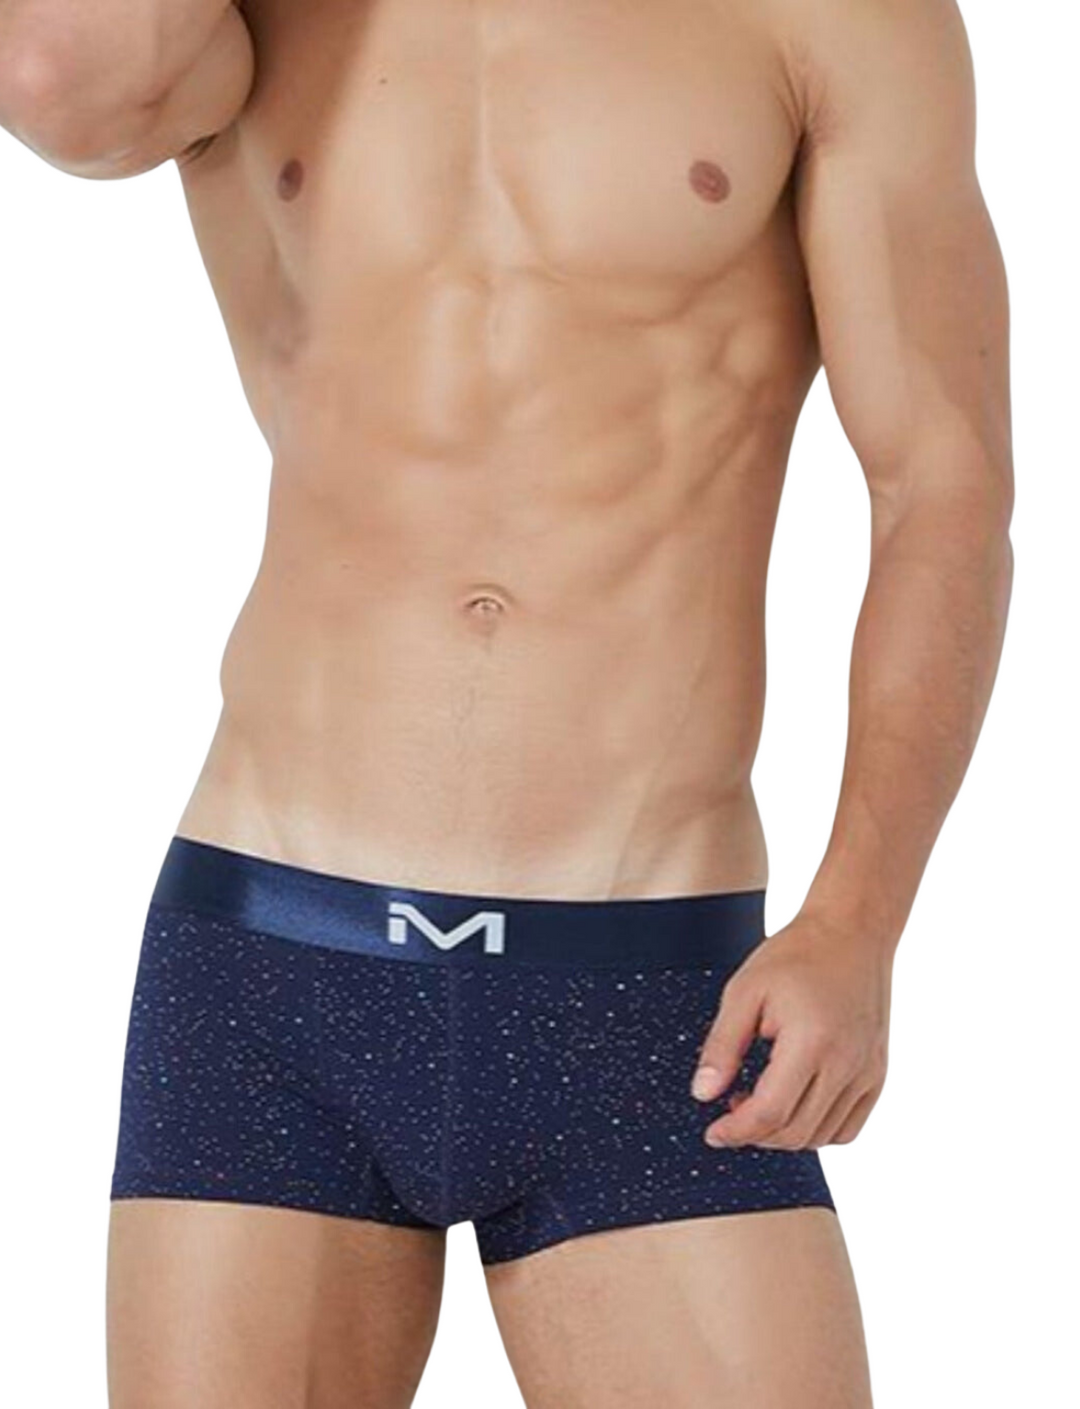 MENCCINO Low-Rise Boxerbrief Trunk